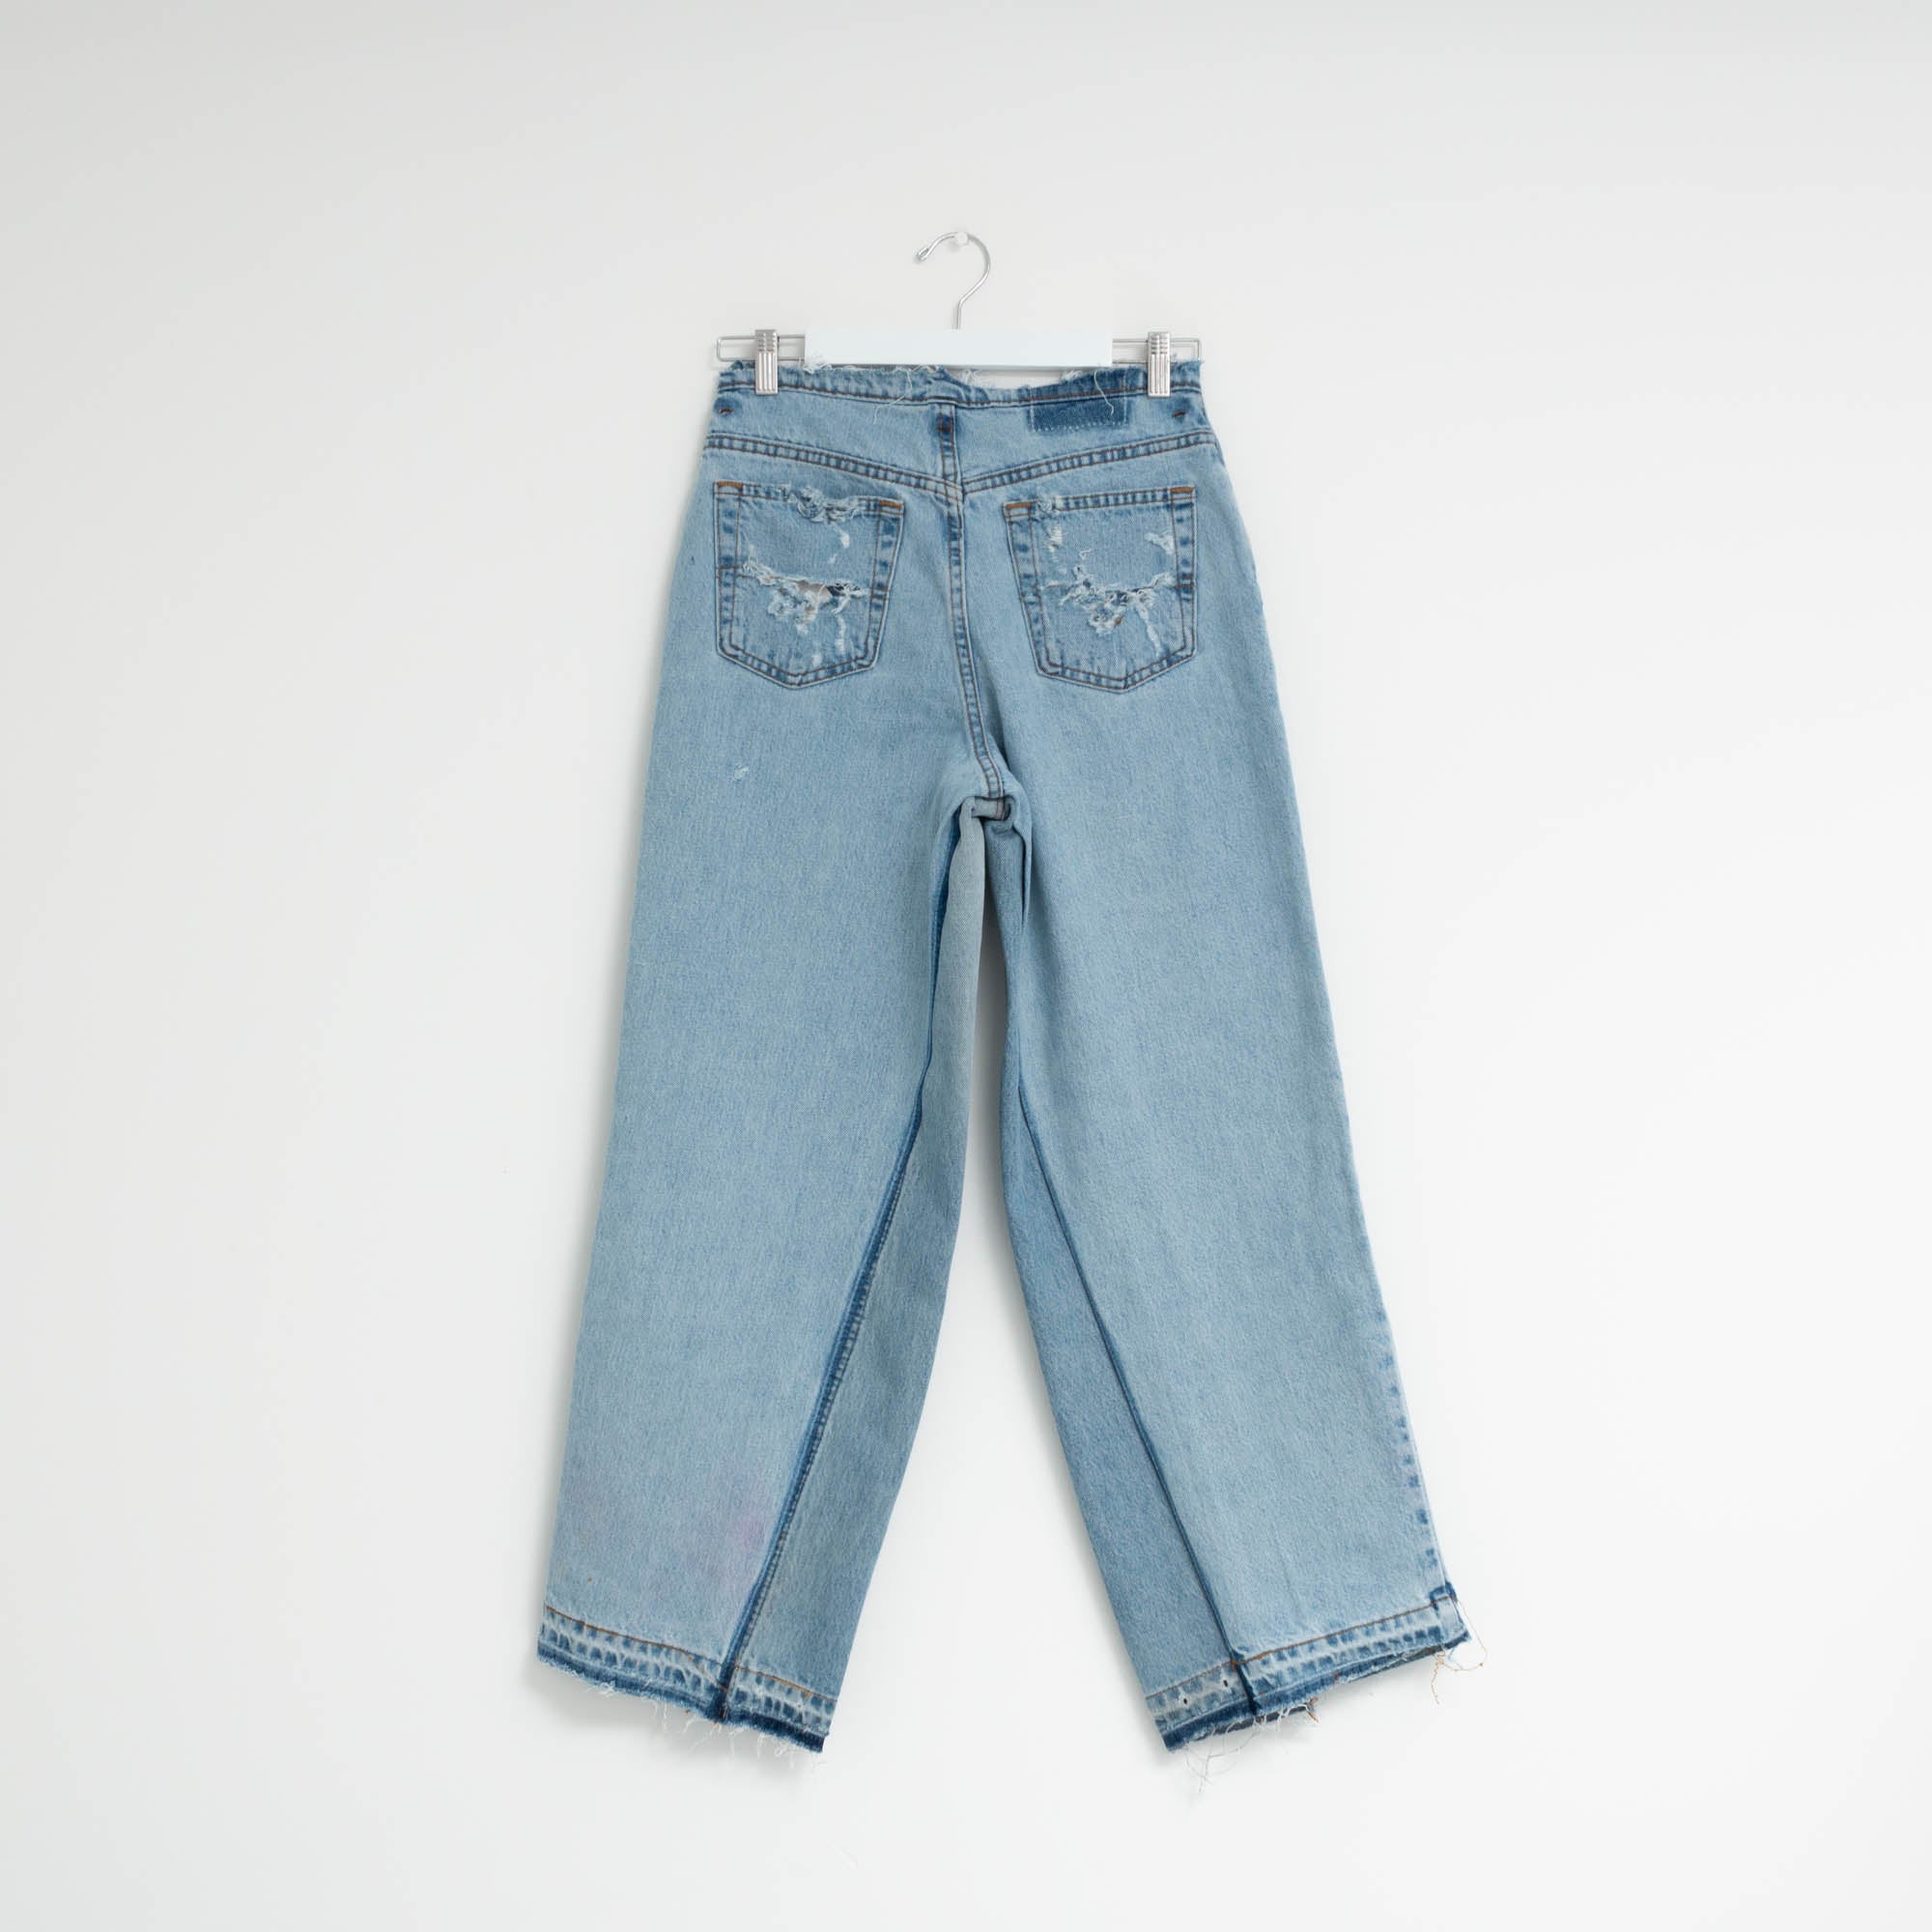 "FLARE" Jeans W30 L30